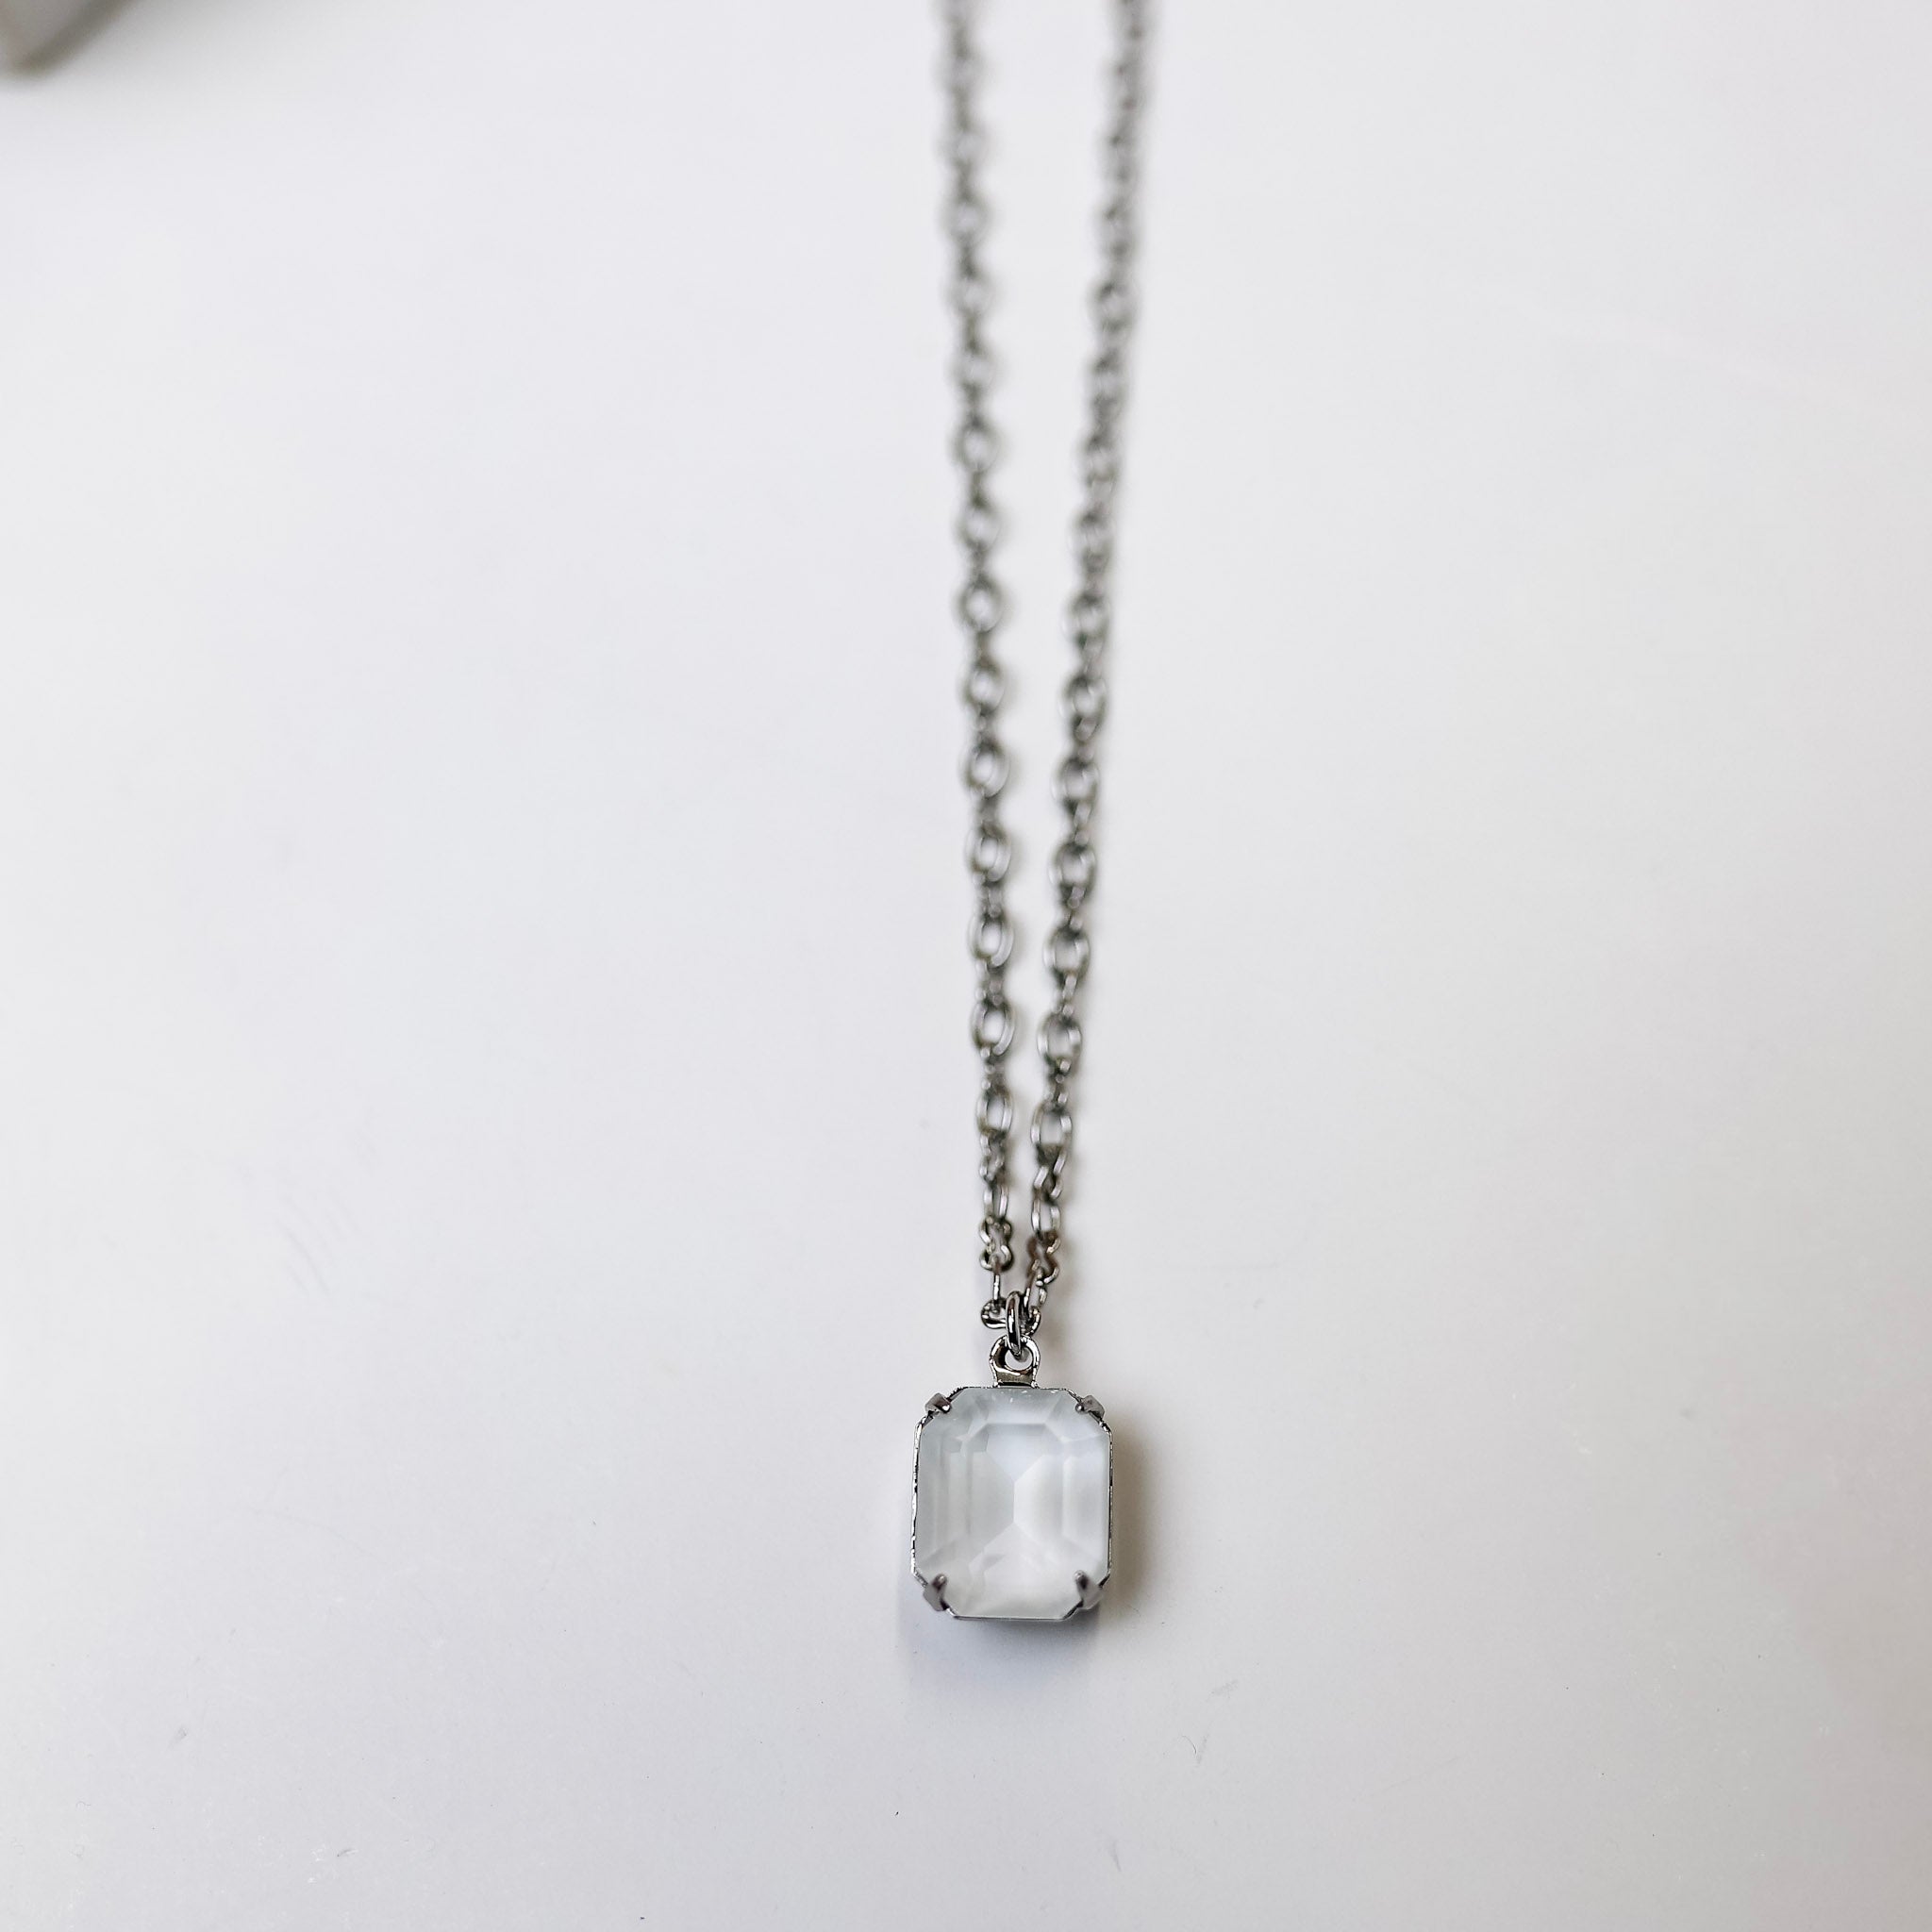 A silver tone chain necklace with an ivory emerald cut crystal pendant.